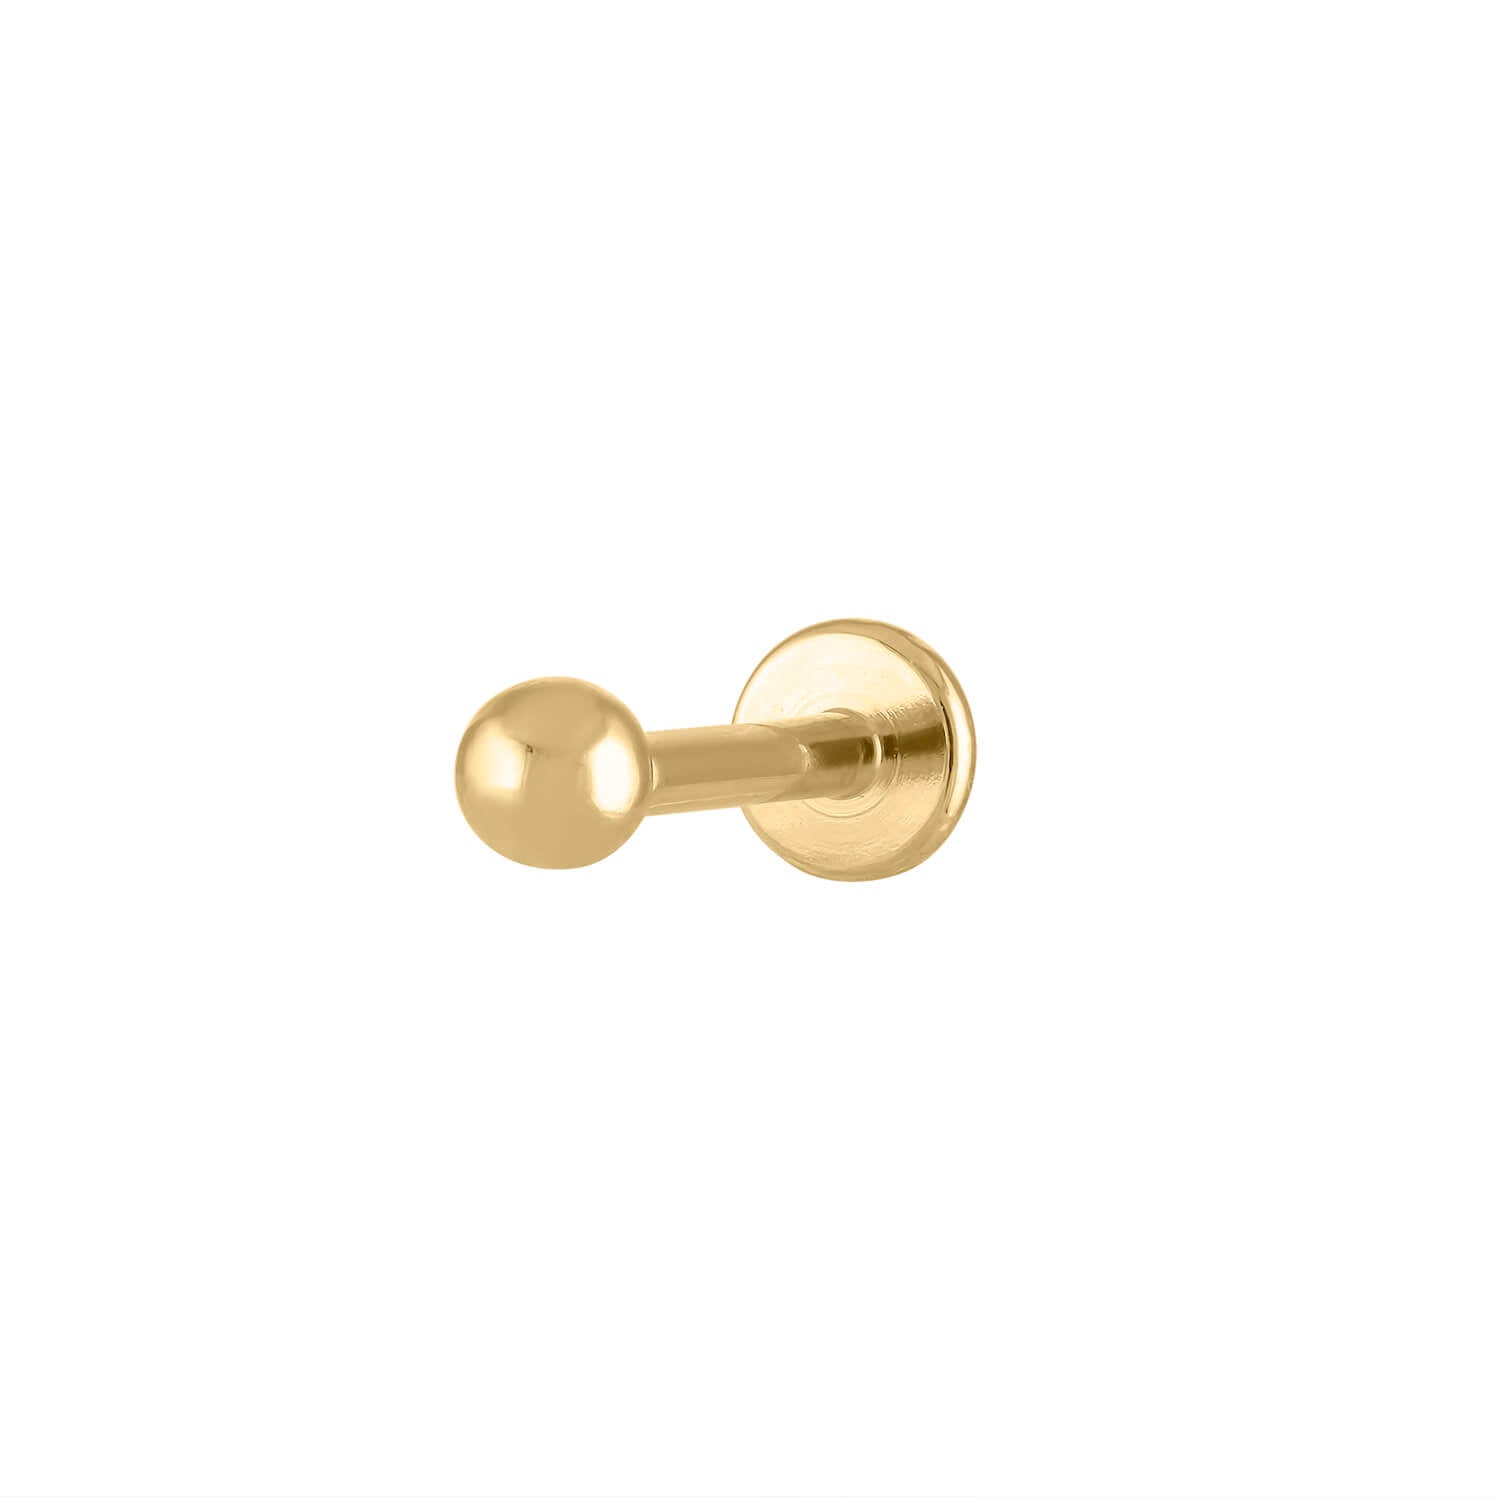 Tiny Trinity Ball Back Earrings in 14K Gold, Pair of Earrings / Gold at Maison Miru